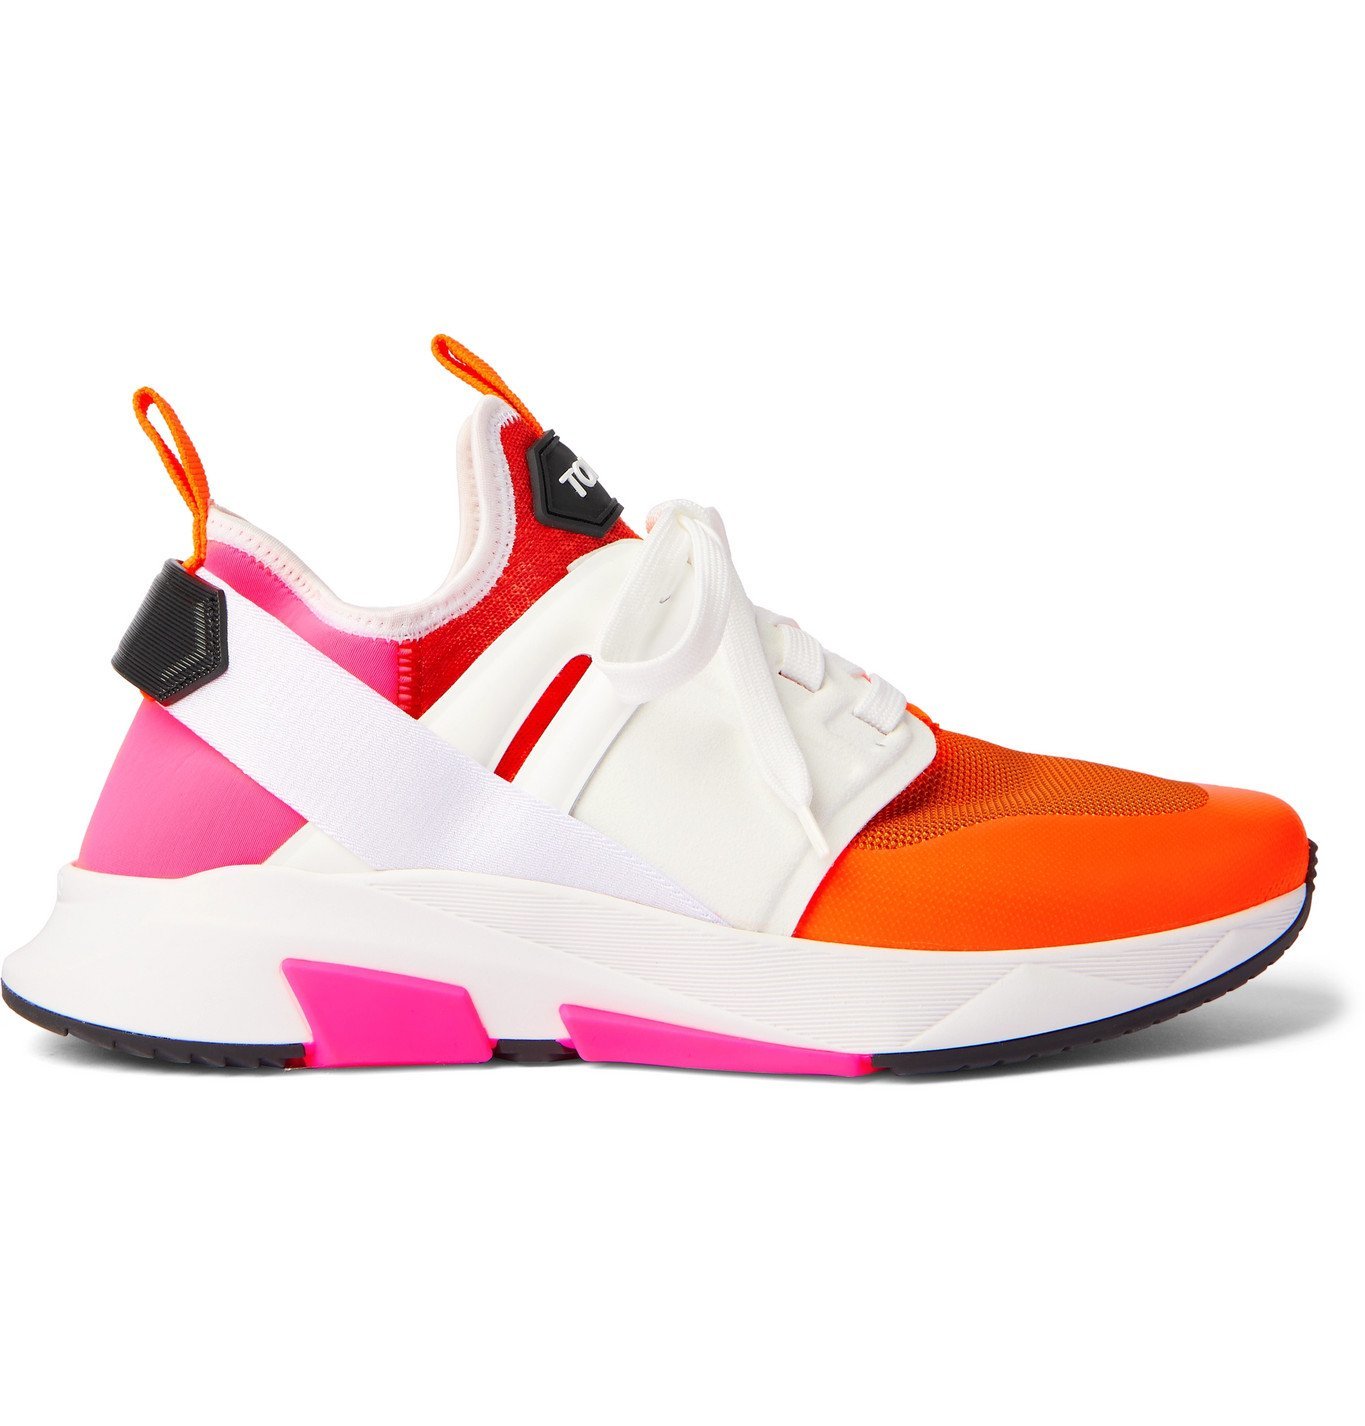 TOM FORD - Jago Neoprene, Suede and Leather Sneakers - Orange TOM FORD